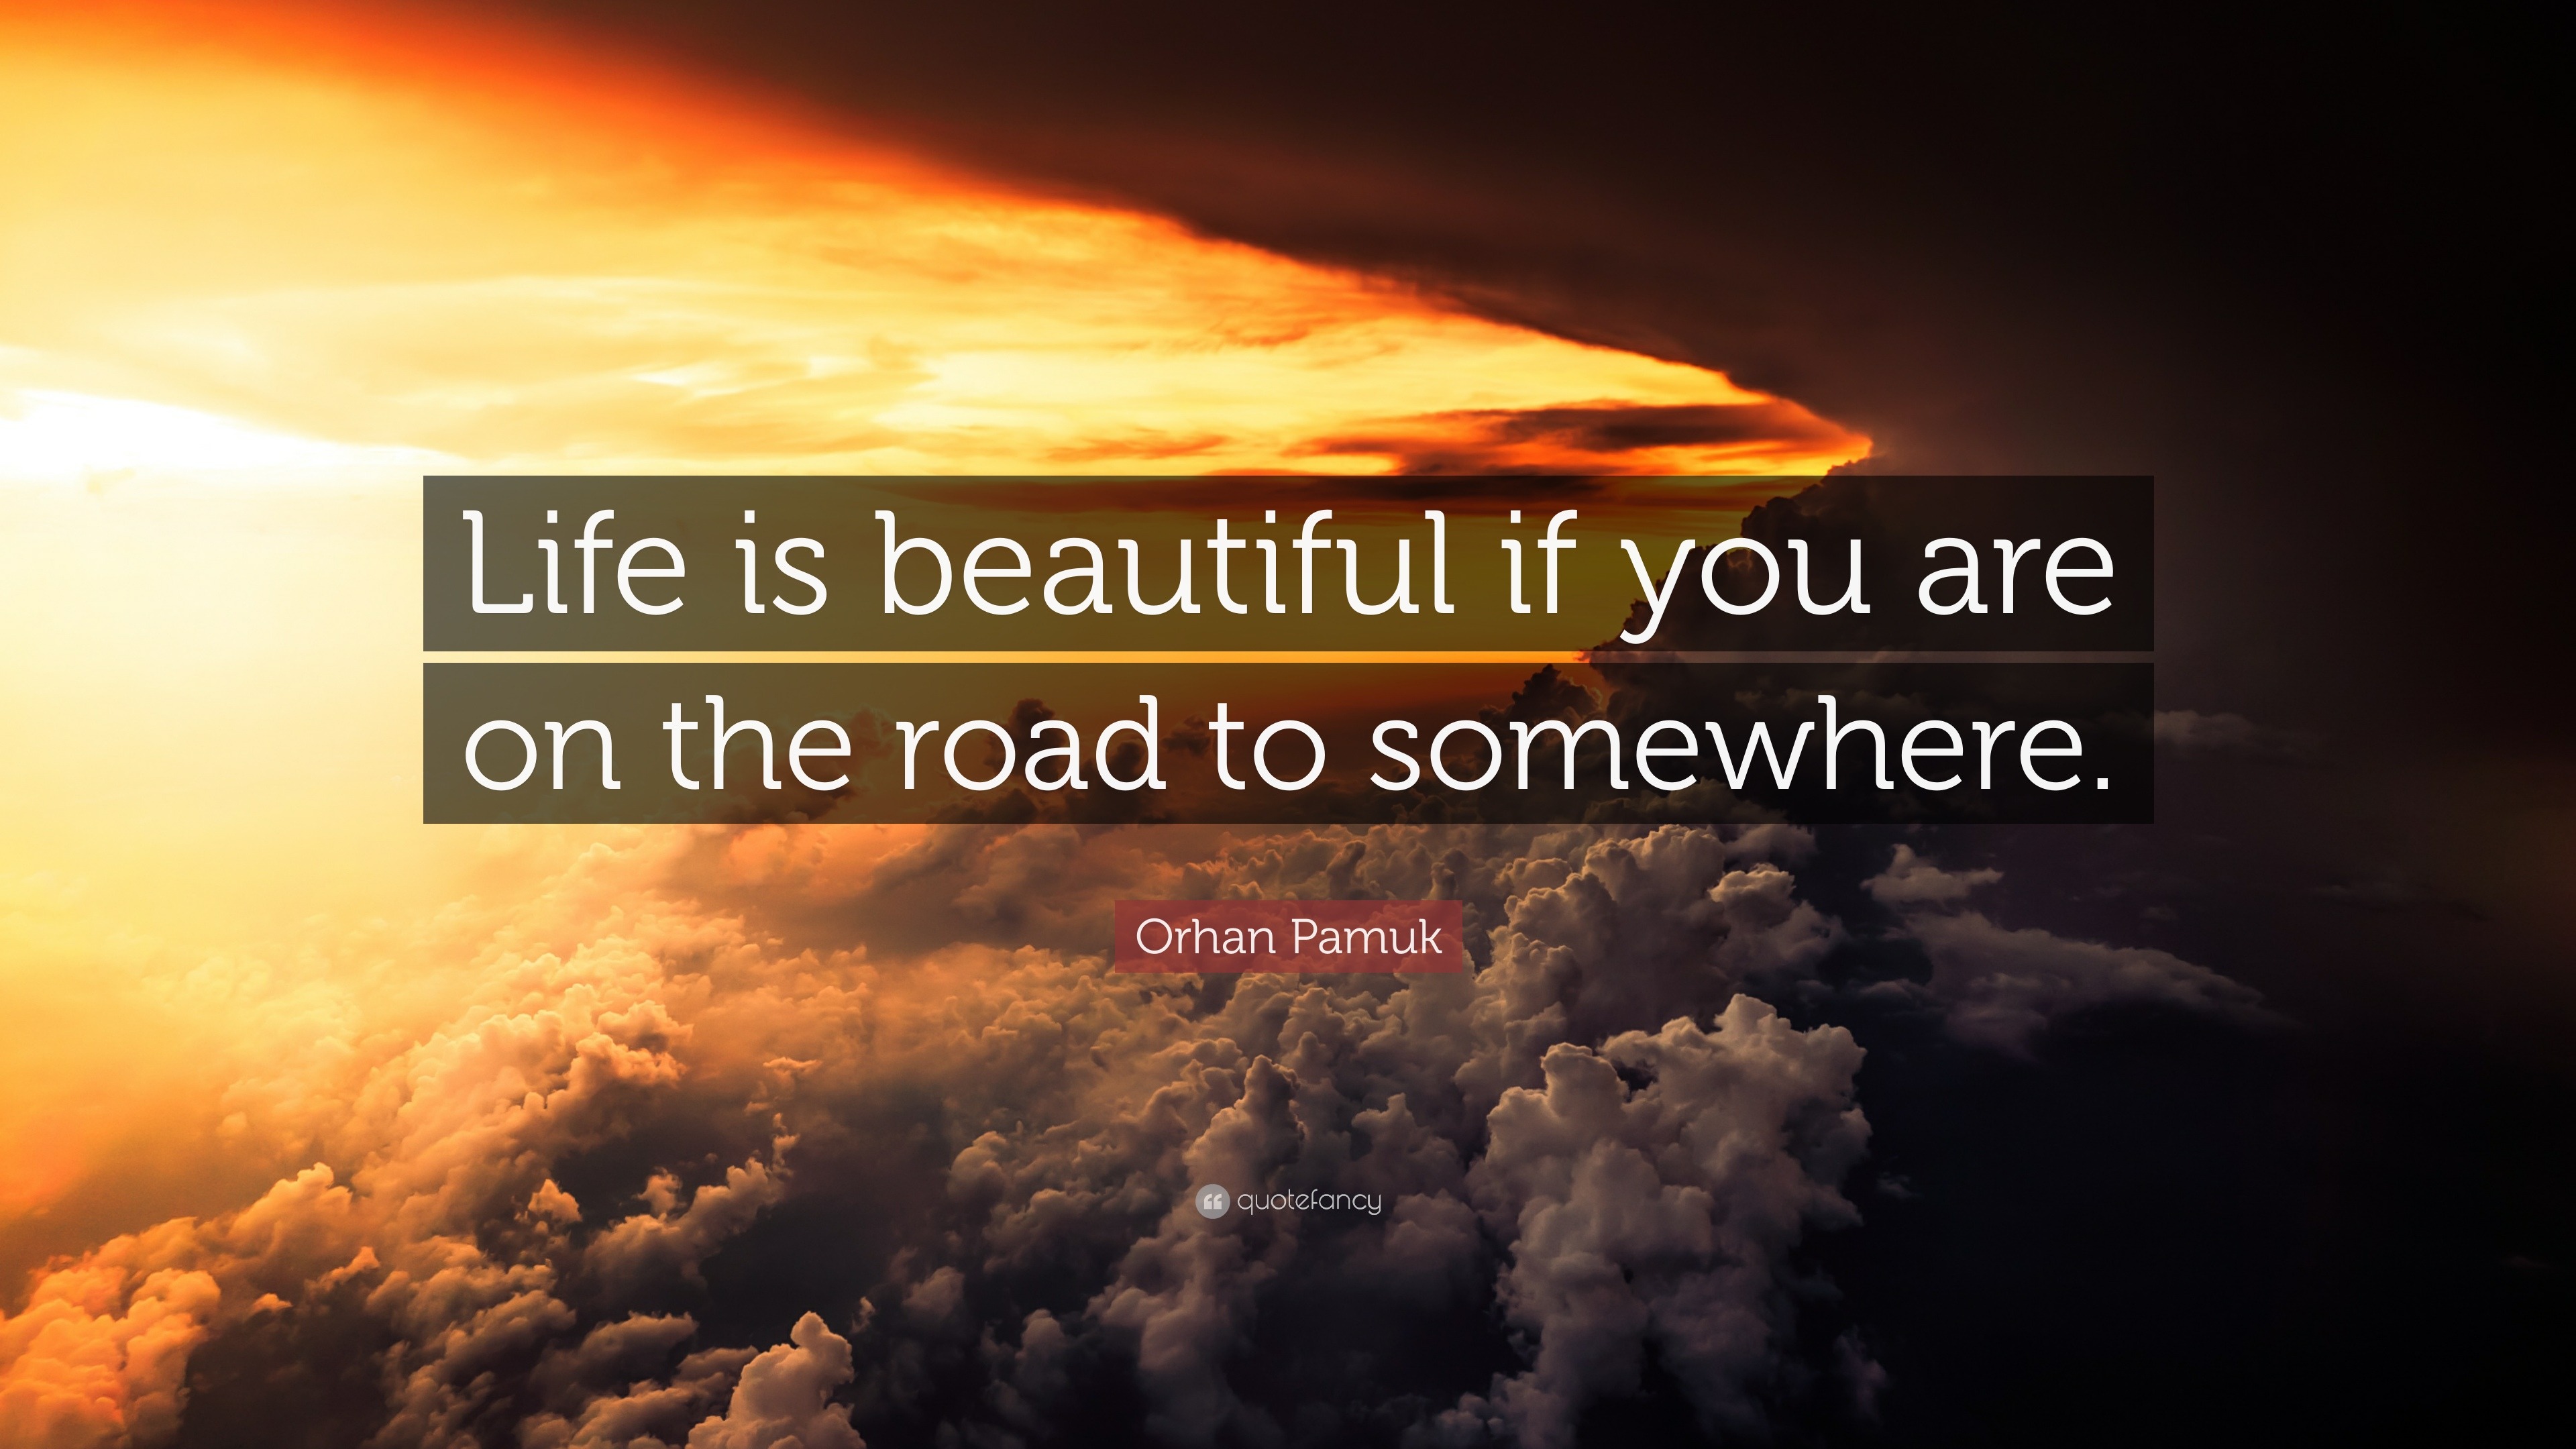 Orhan Pamuk Quote “Life is beautiful if you are on the road to somewhere